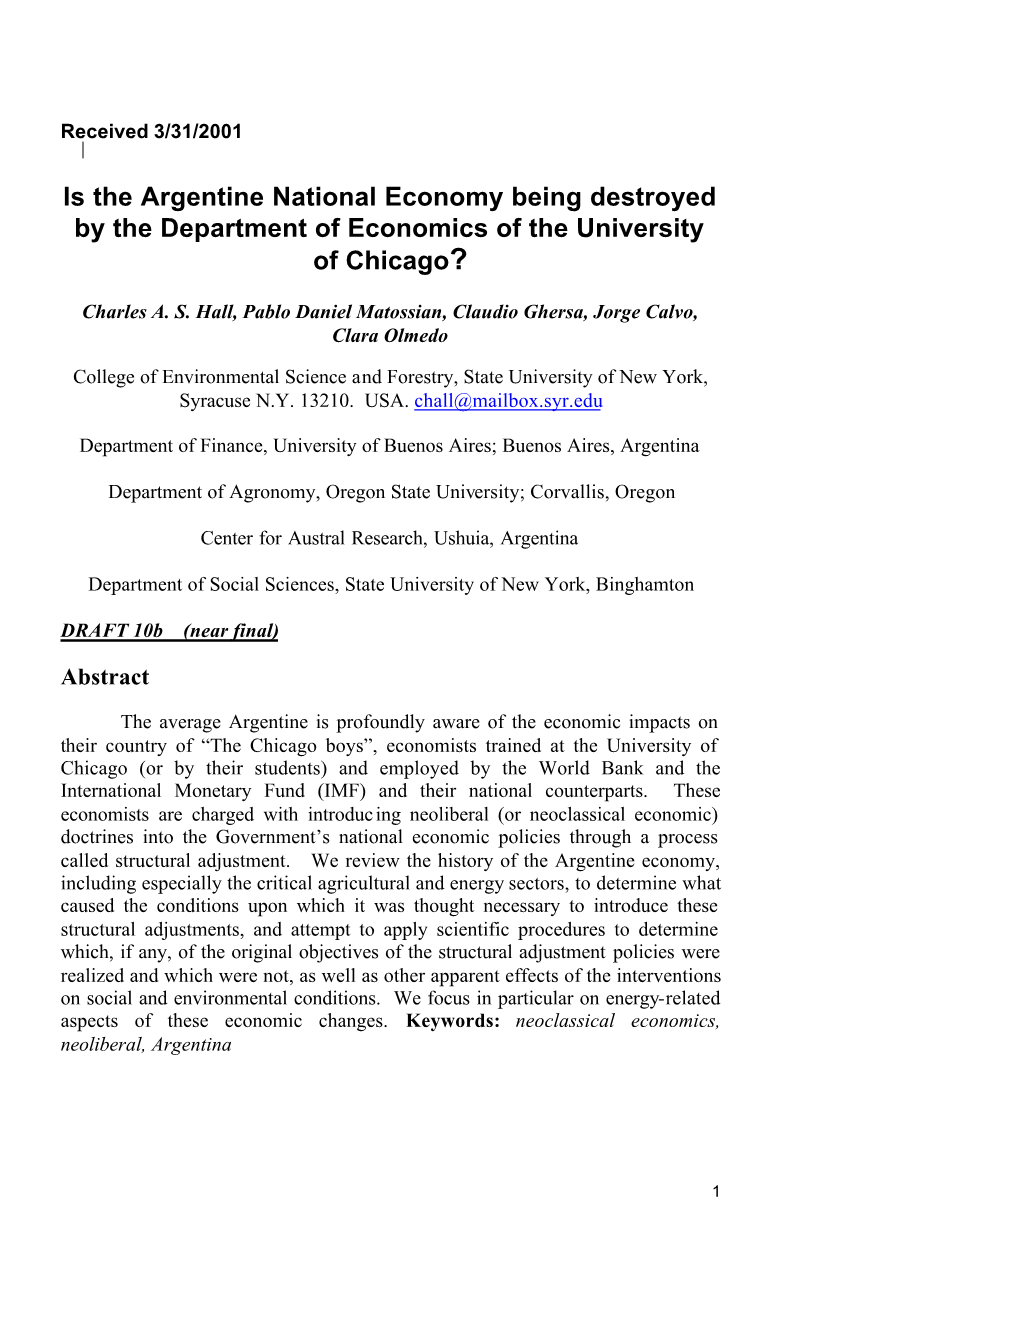 Is the Argentine National Economy Being Destroyed by the Department of Economics of the University of Chicago?